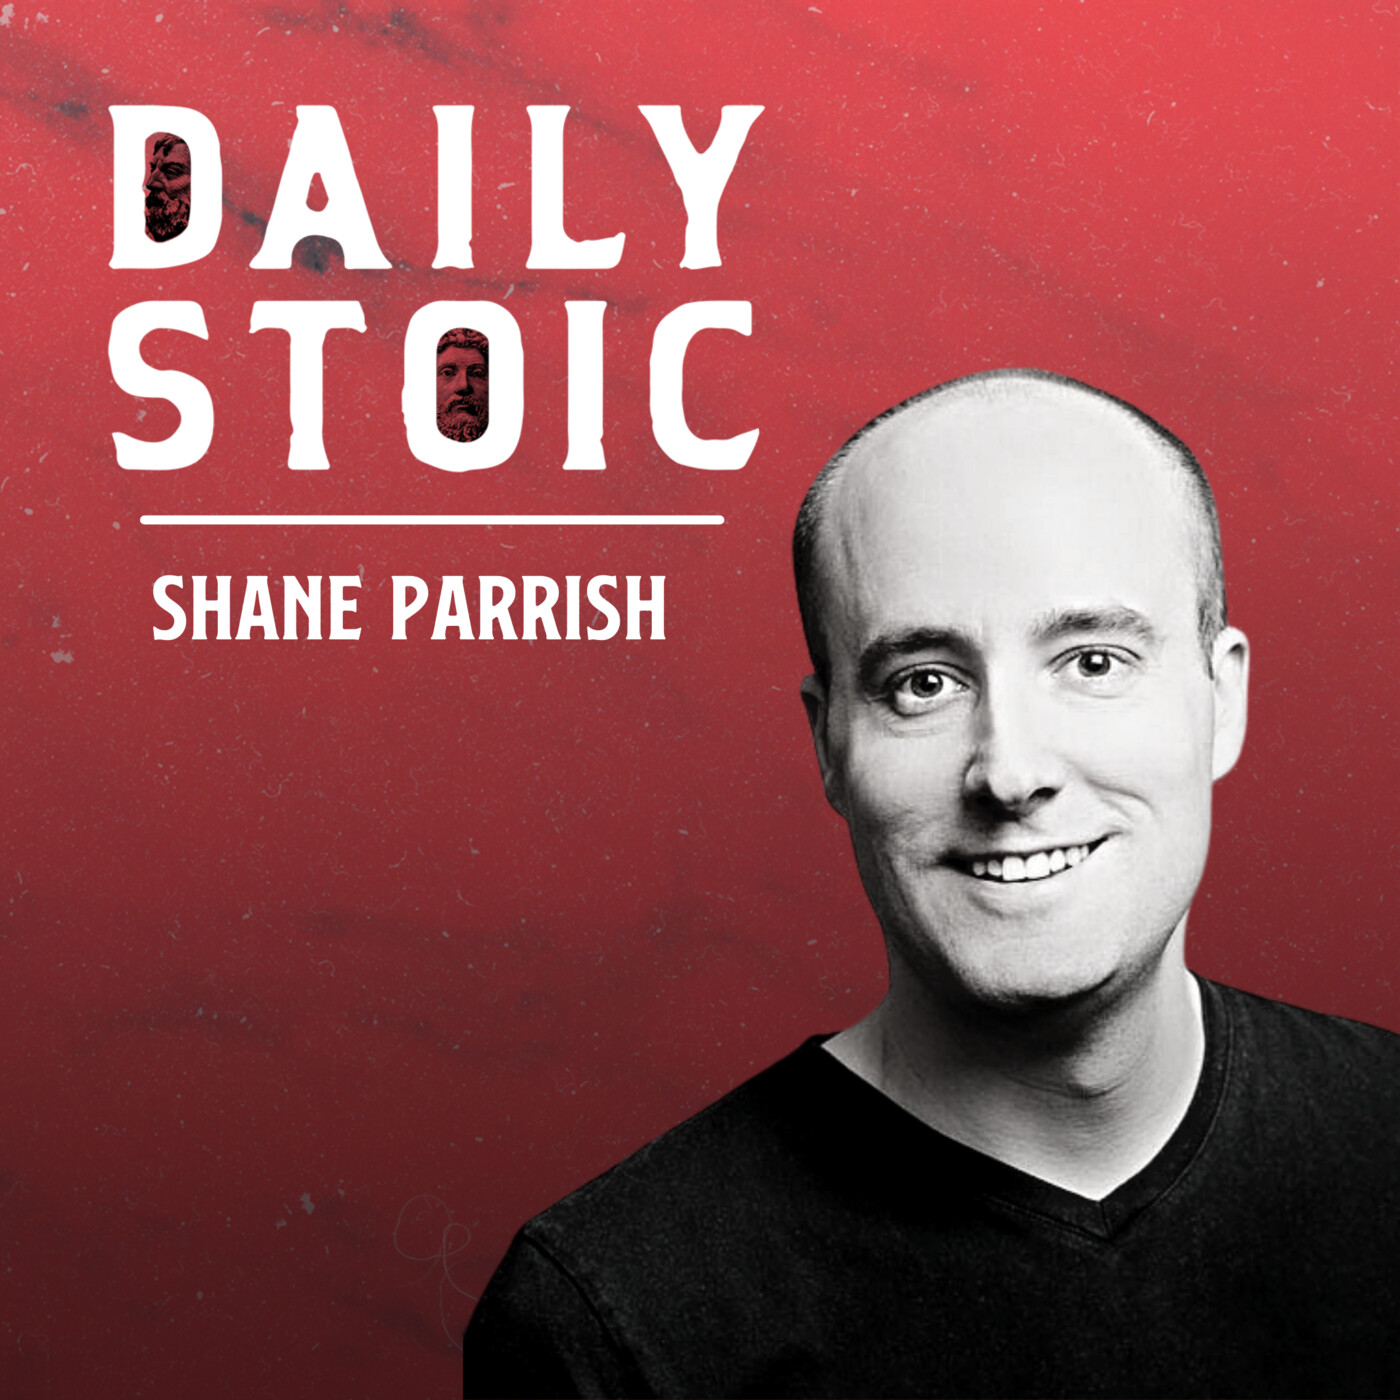 Shane Parrish on Defining Identity and the Path to Wisdom (PT 2)